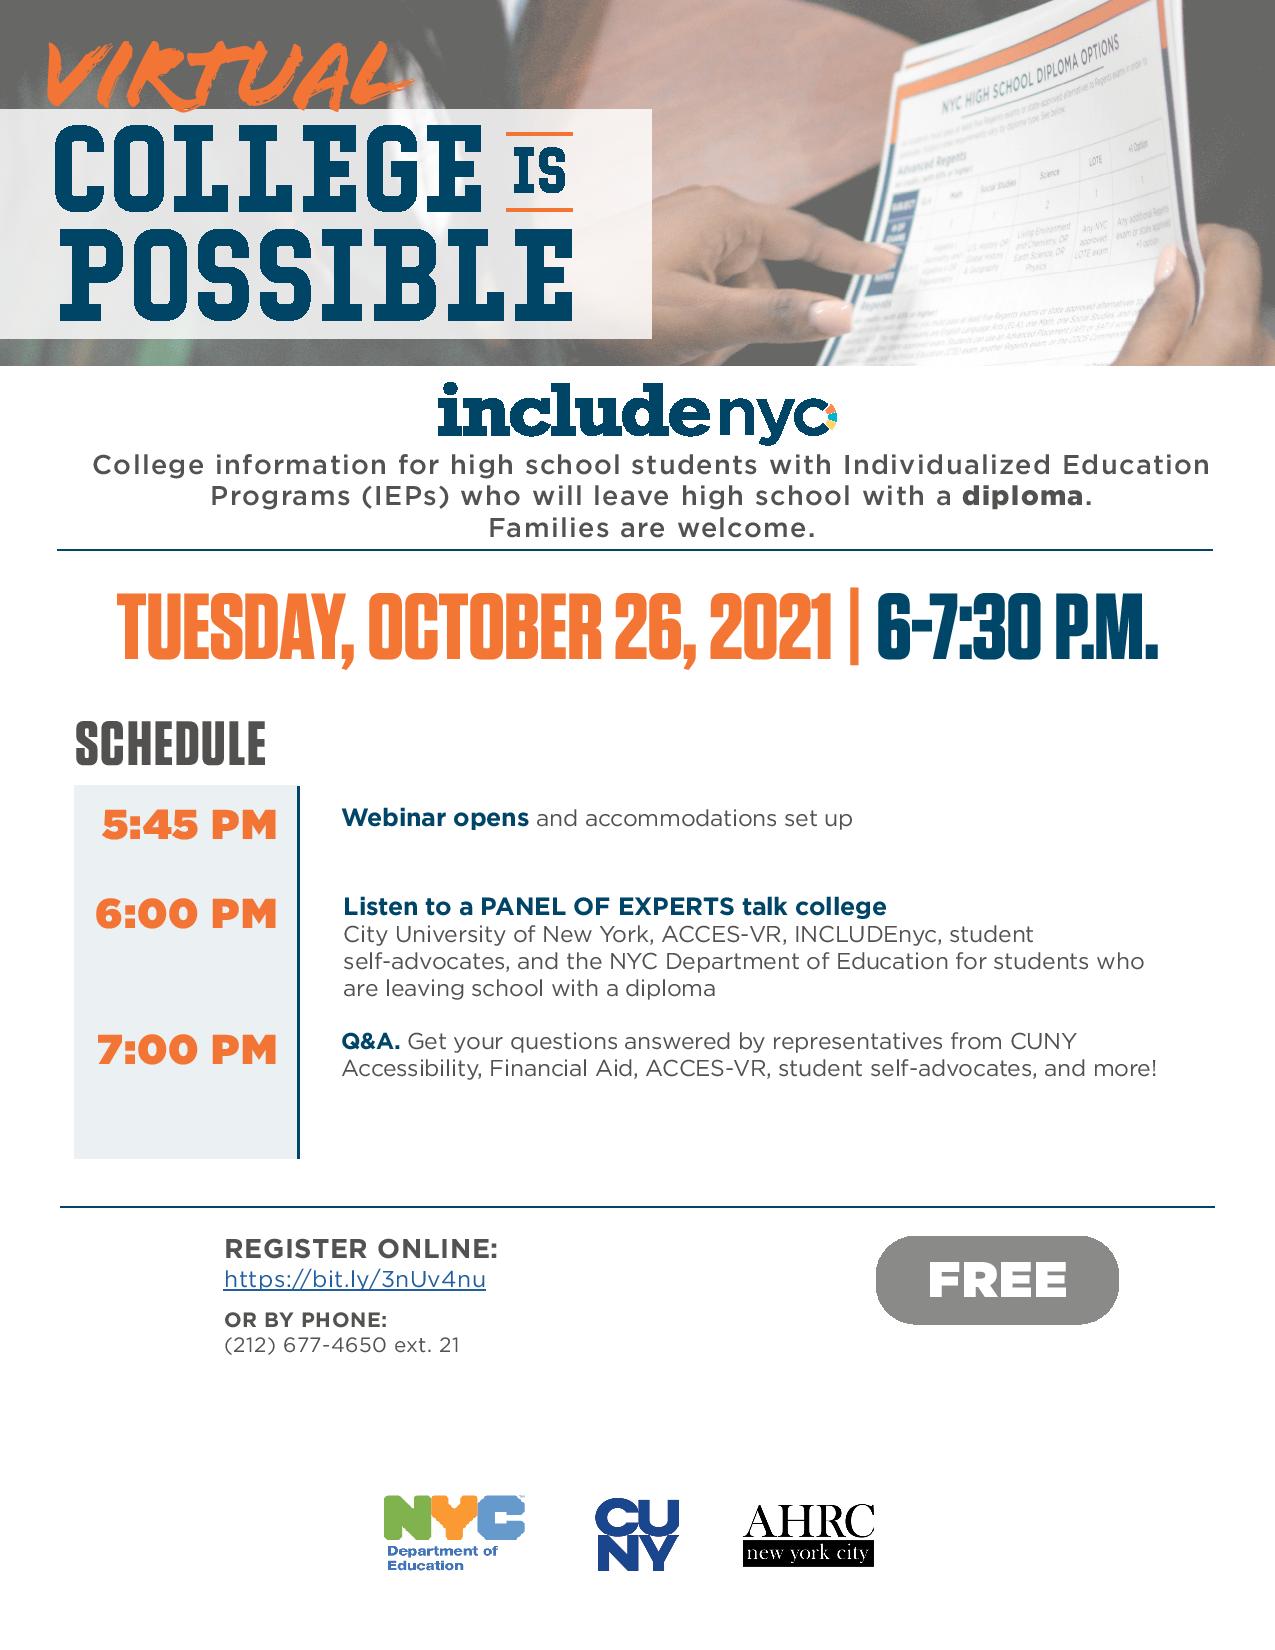 INCLUDEnyc's Virtual "College is Possible" Information Session @ online event